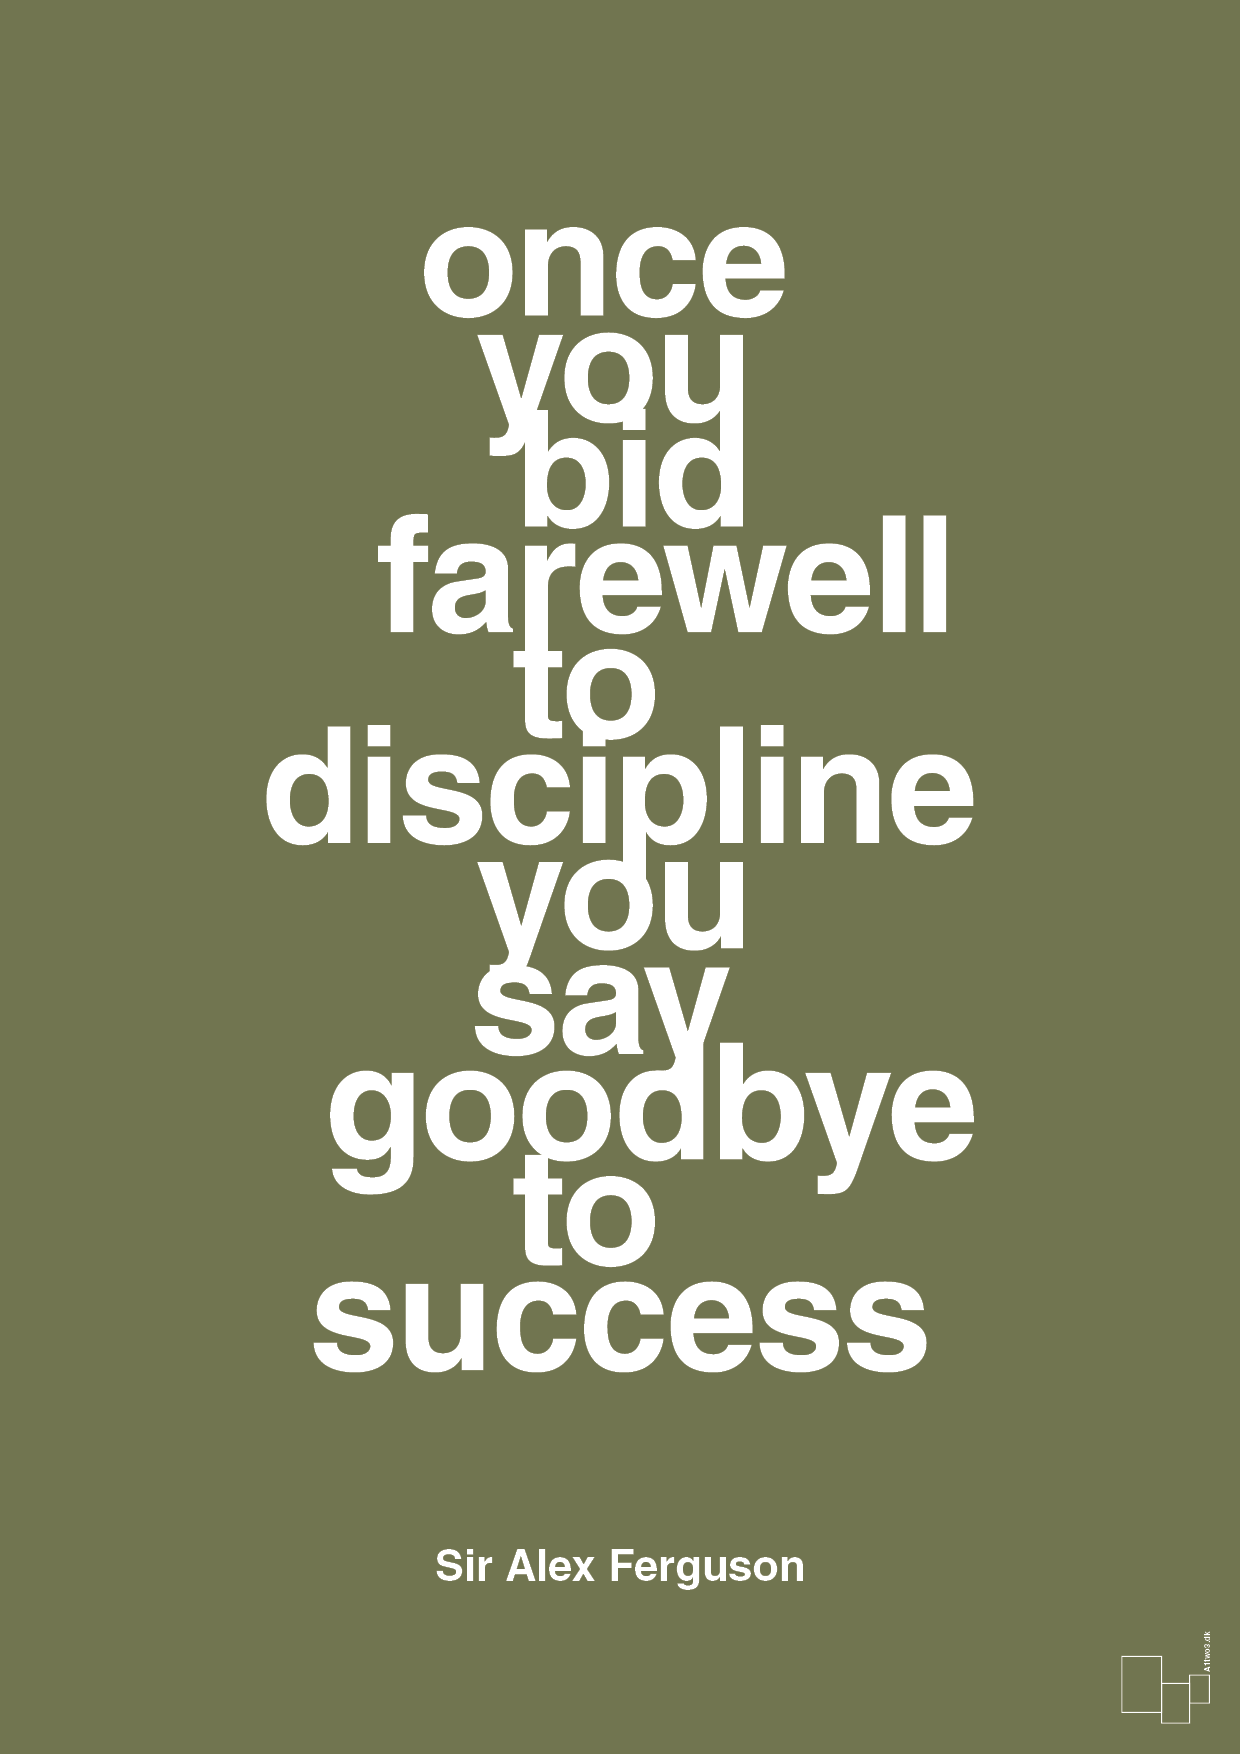 once you bid farewell to discipline you say goodbye to success - Plakat med Citater i Secret Meadow